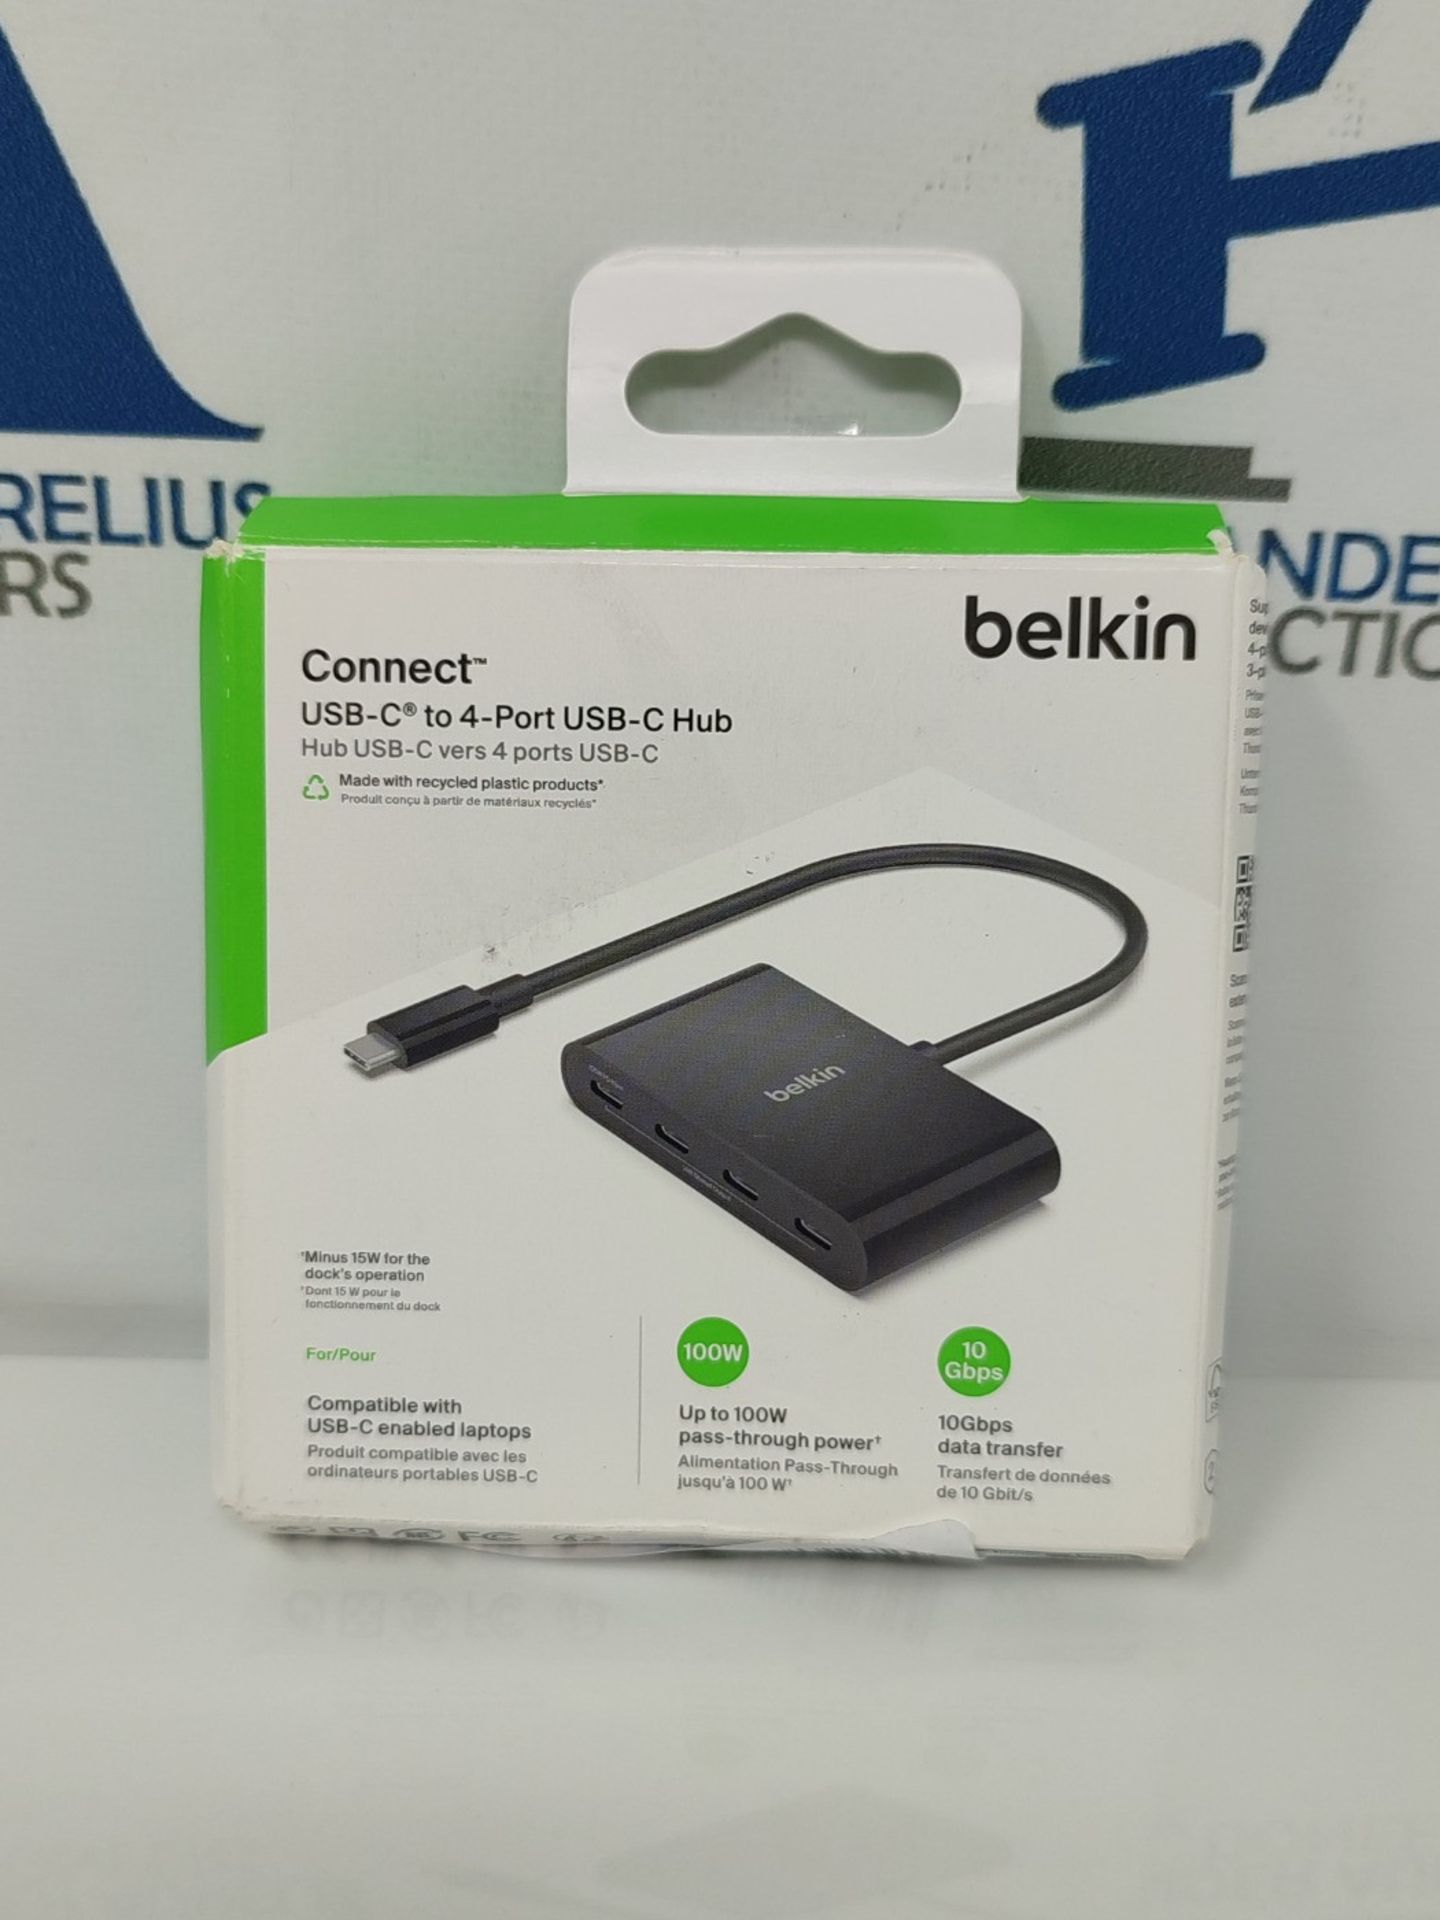 Belkin CONNECT USB-C"! to 4-Port USB-C Hub, Multiport Adapter Dongle with 4 USB-C 3.2 - Bild 2 aus 3